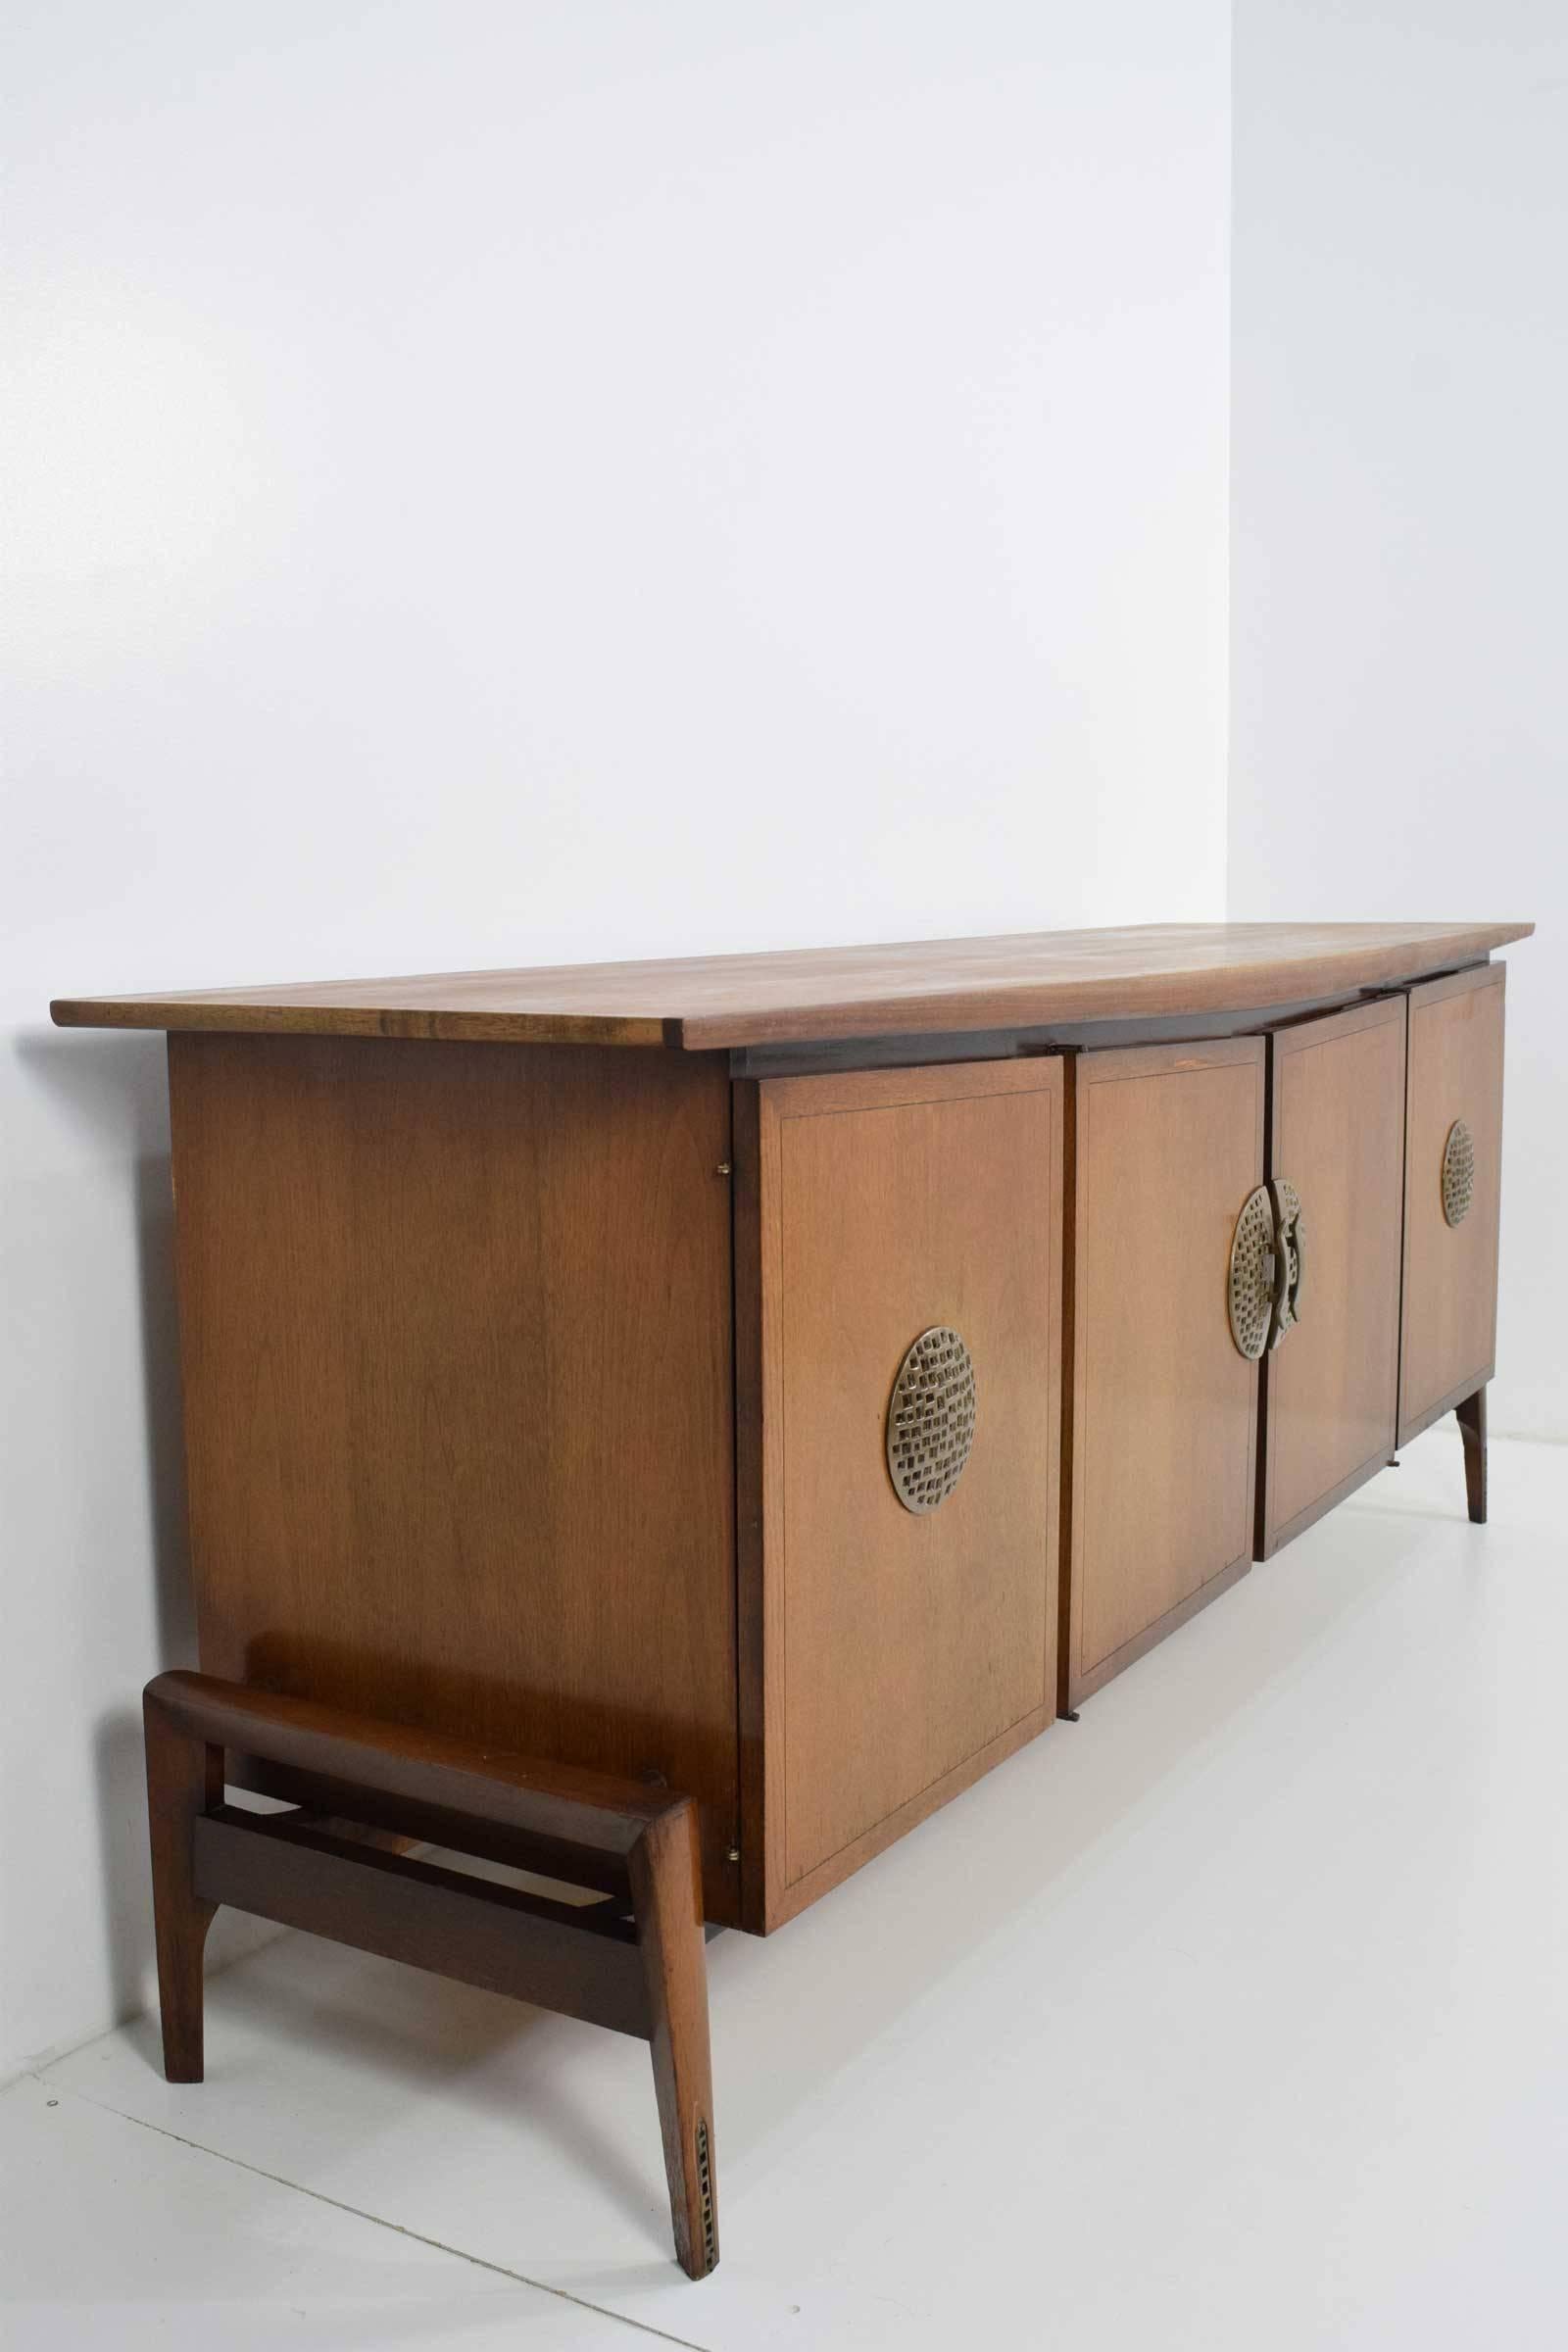 Walnut with brushed gold metal detail on legs and handles. Very well constructed with shelves in center and drawers on each side. Floats on a wooden base.